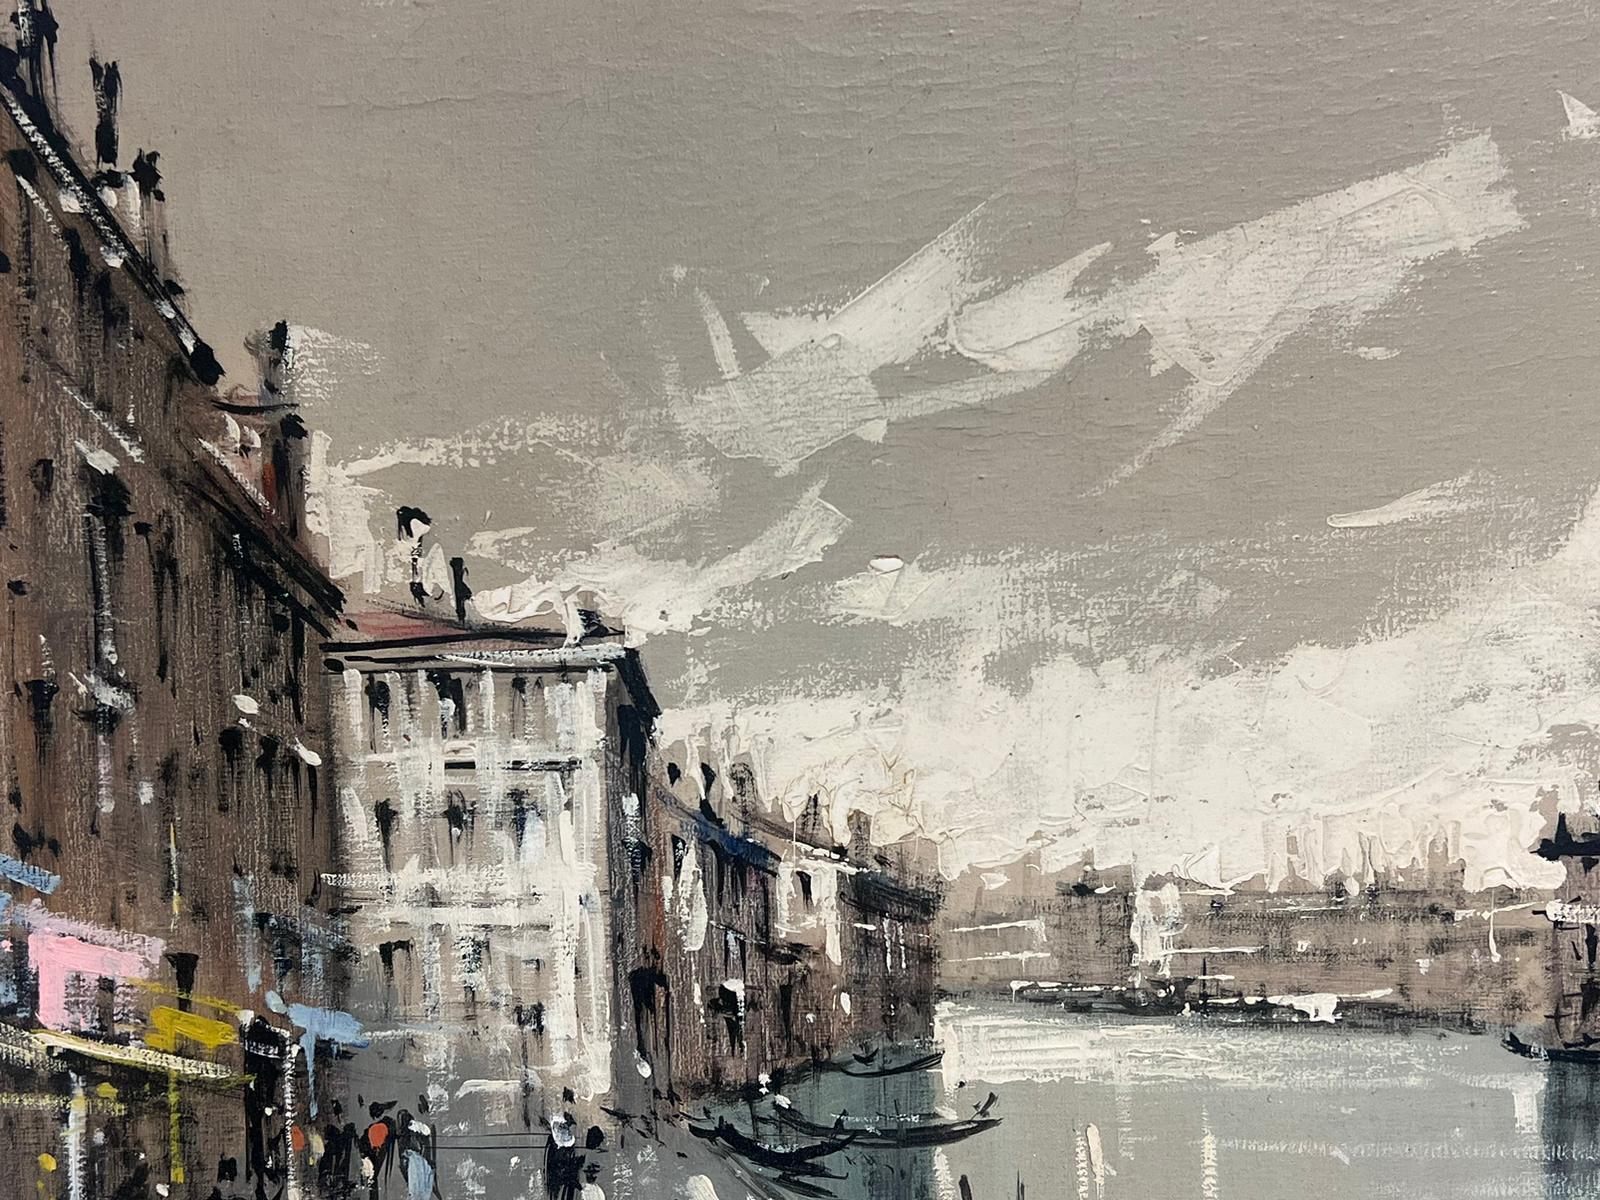 The Grand Canal, Venice
Alvarez ( Mid 20th Century)
signed oil on canvas, framed
framed: 25 x 33 inches
canvas: 20 x 28 inches
provenance: private collection, France
condition: very good and sound condition